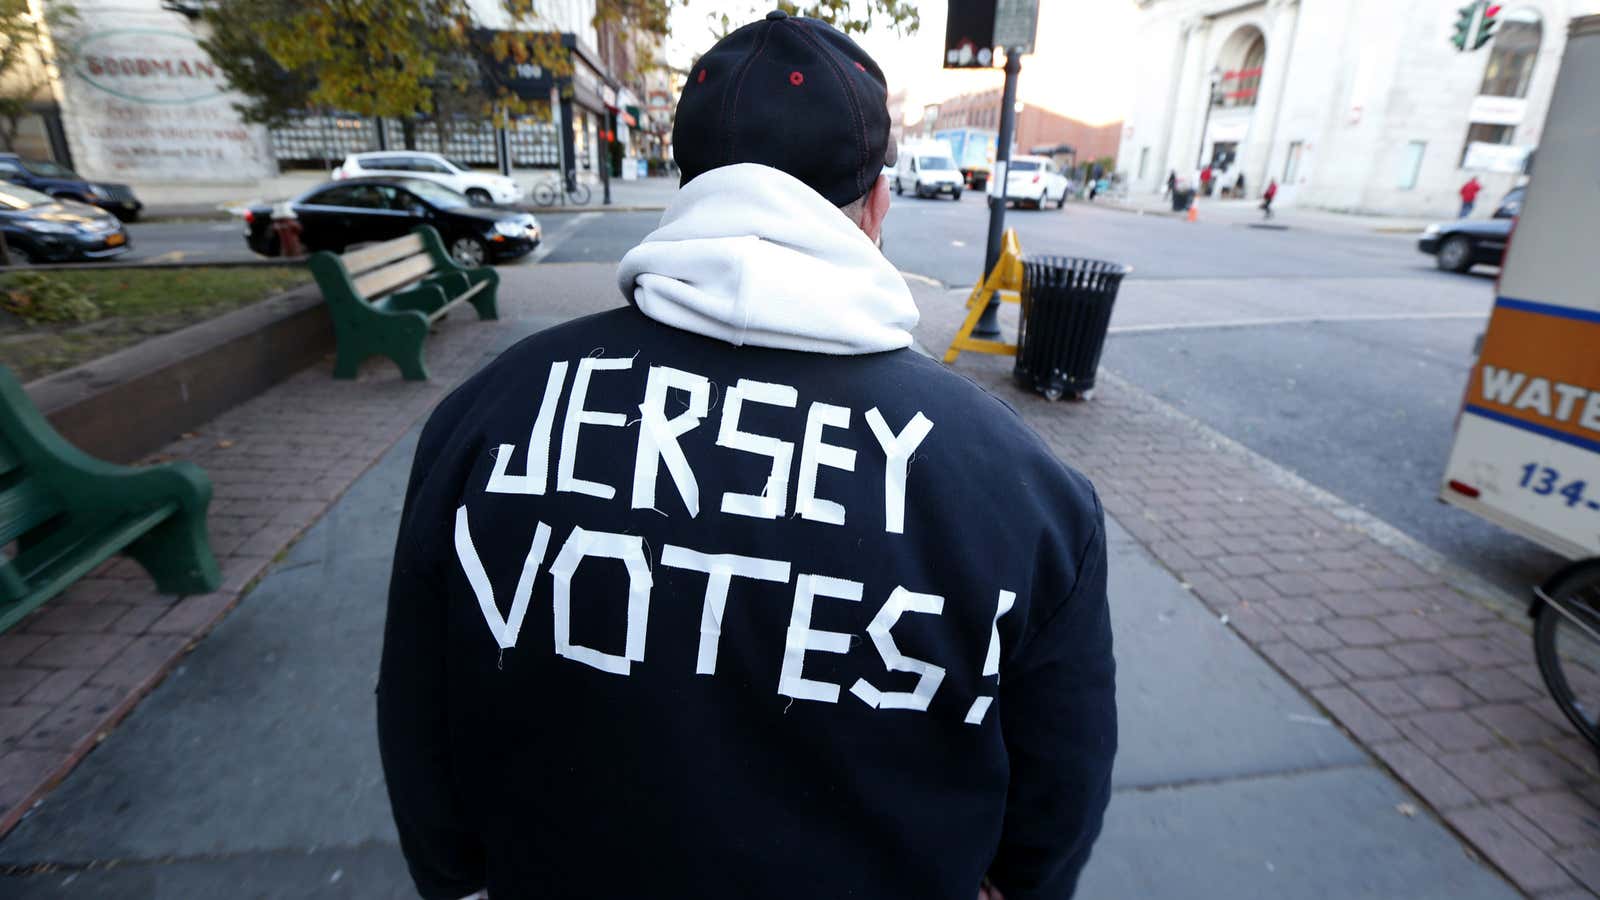 Ed Lippman, 58, wears a message on his jacket on Election Day while walking home, Tuesday, Nov. 6, 2012, in Hoboken, N.J.